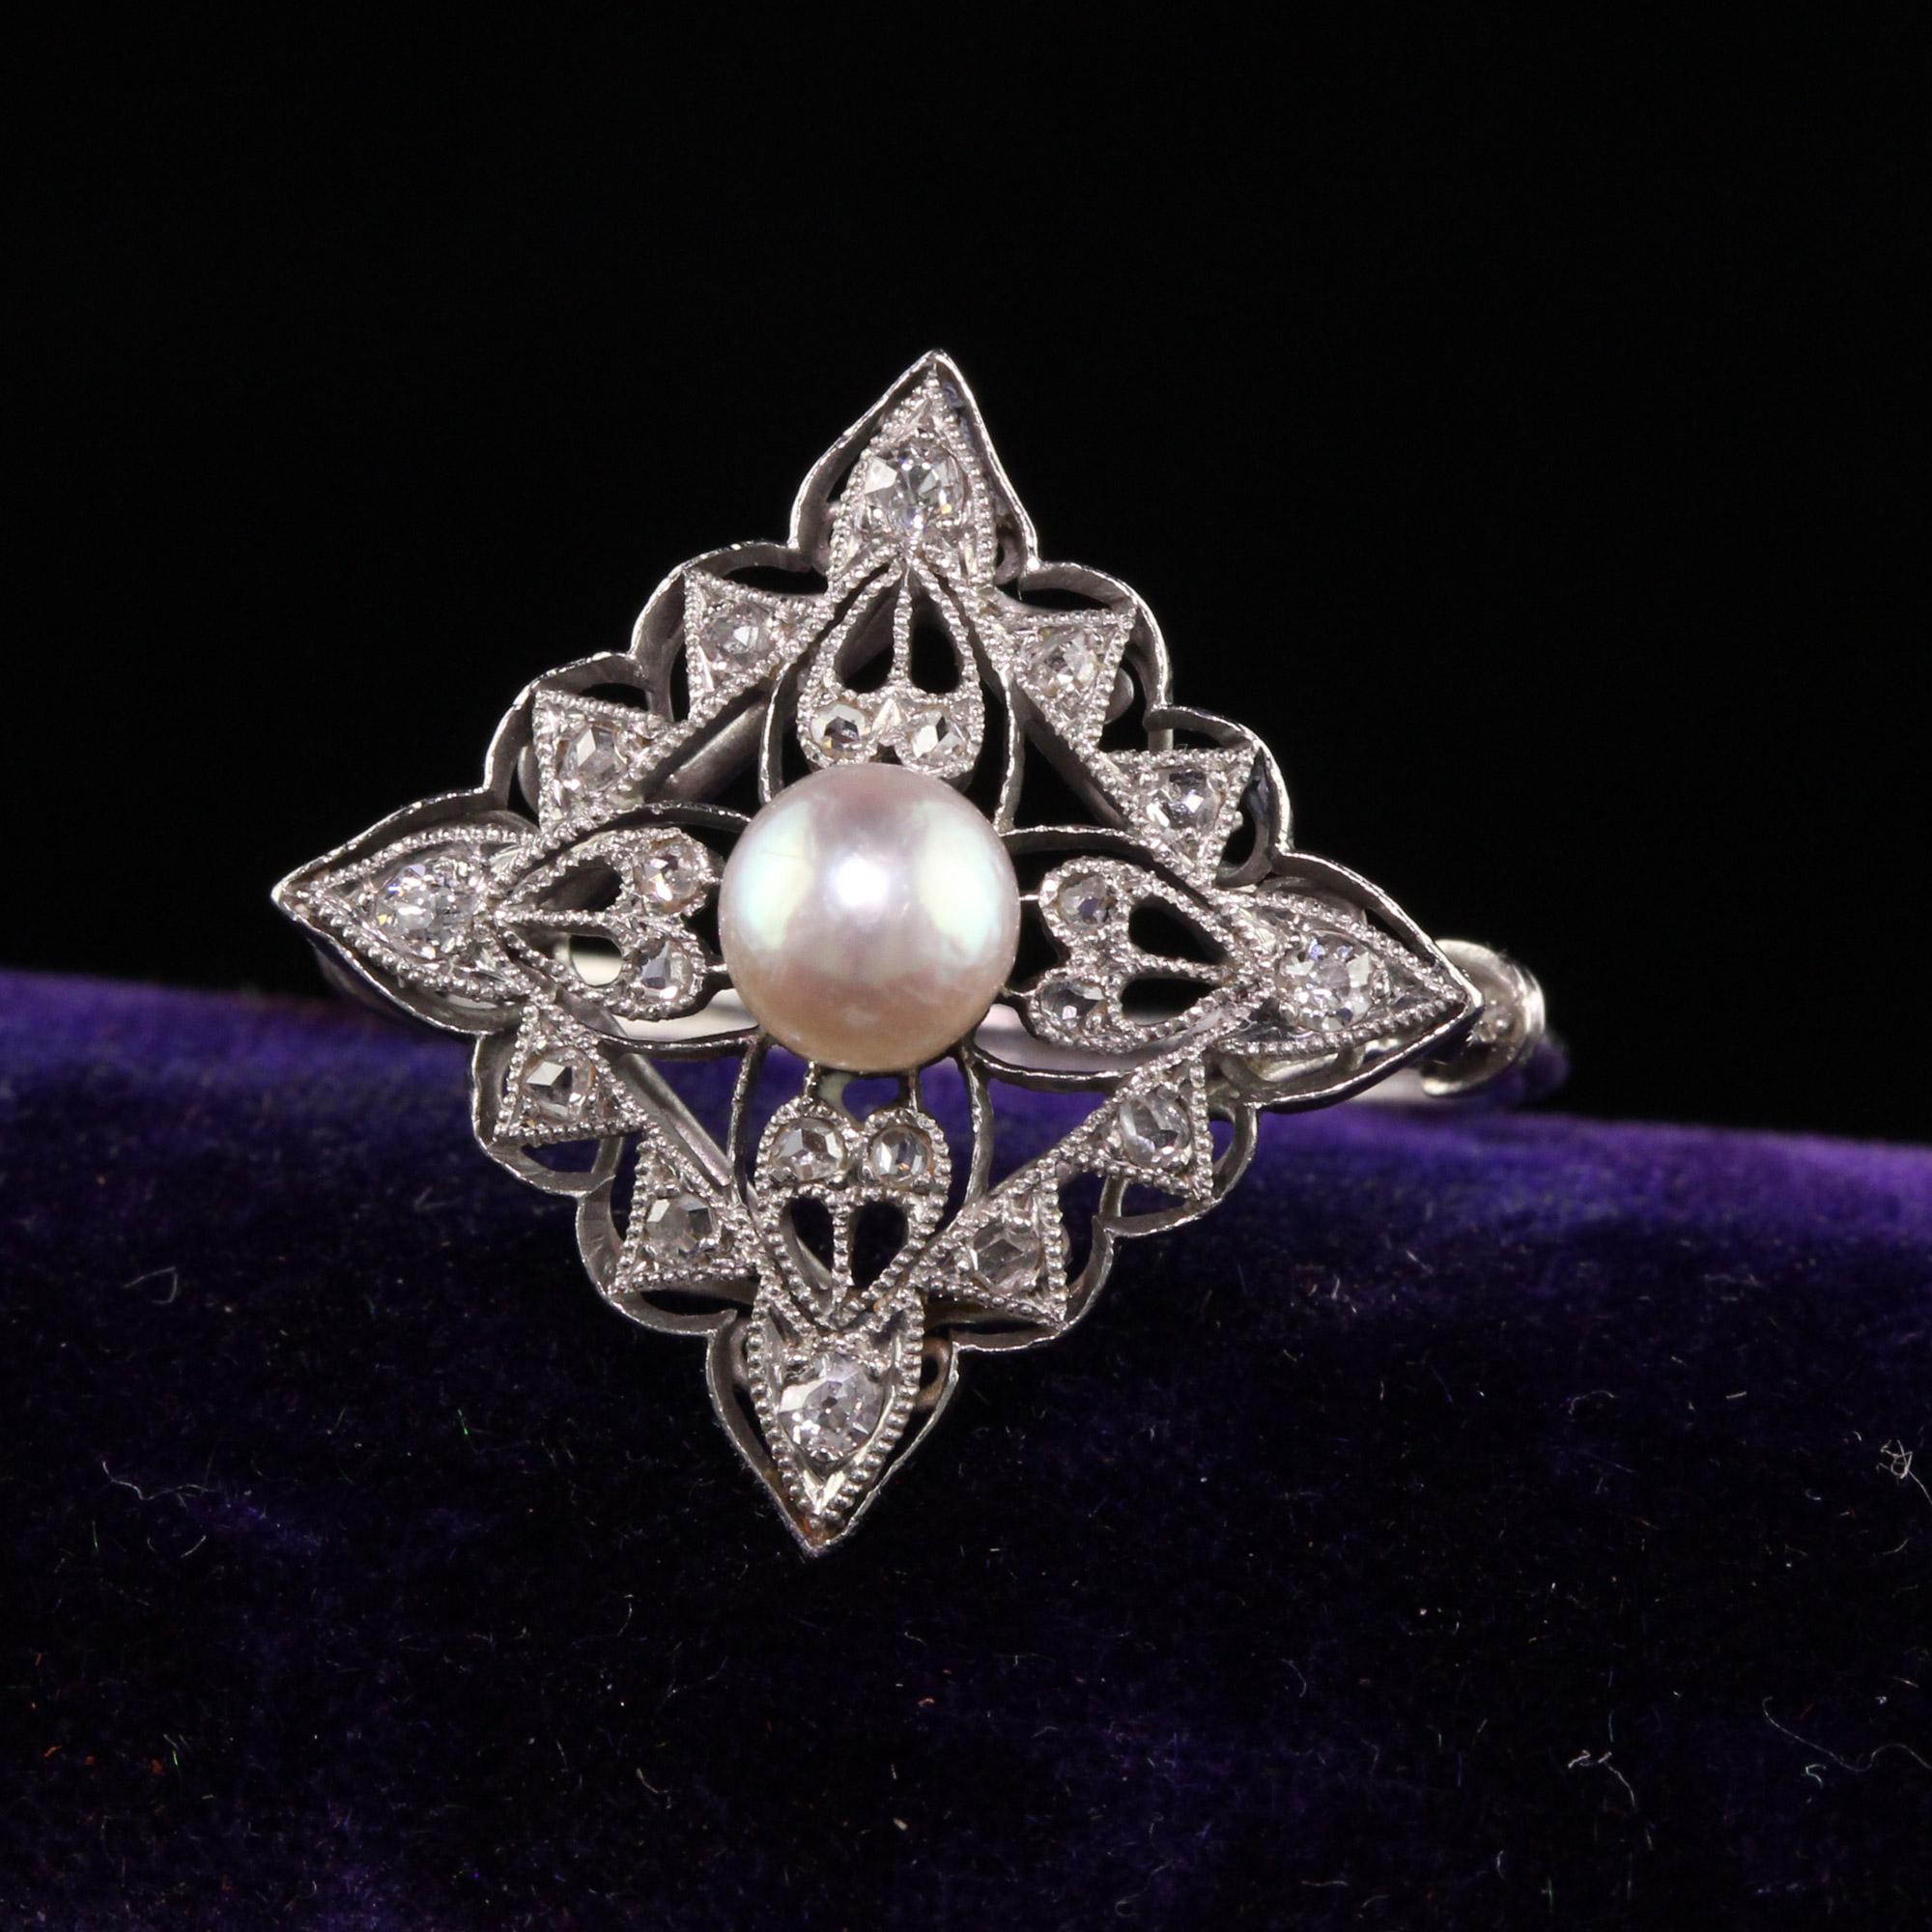 Beautiful Antique Edwardian French Platinum Rose Cut Diamond Pearl Ring. This beautiful ring has rose cuts and a pearl in the center of a ring that is crafted in platinum. The shank has an owl mark on it that implicates it is of french origin.

Item